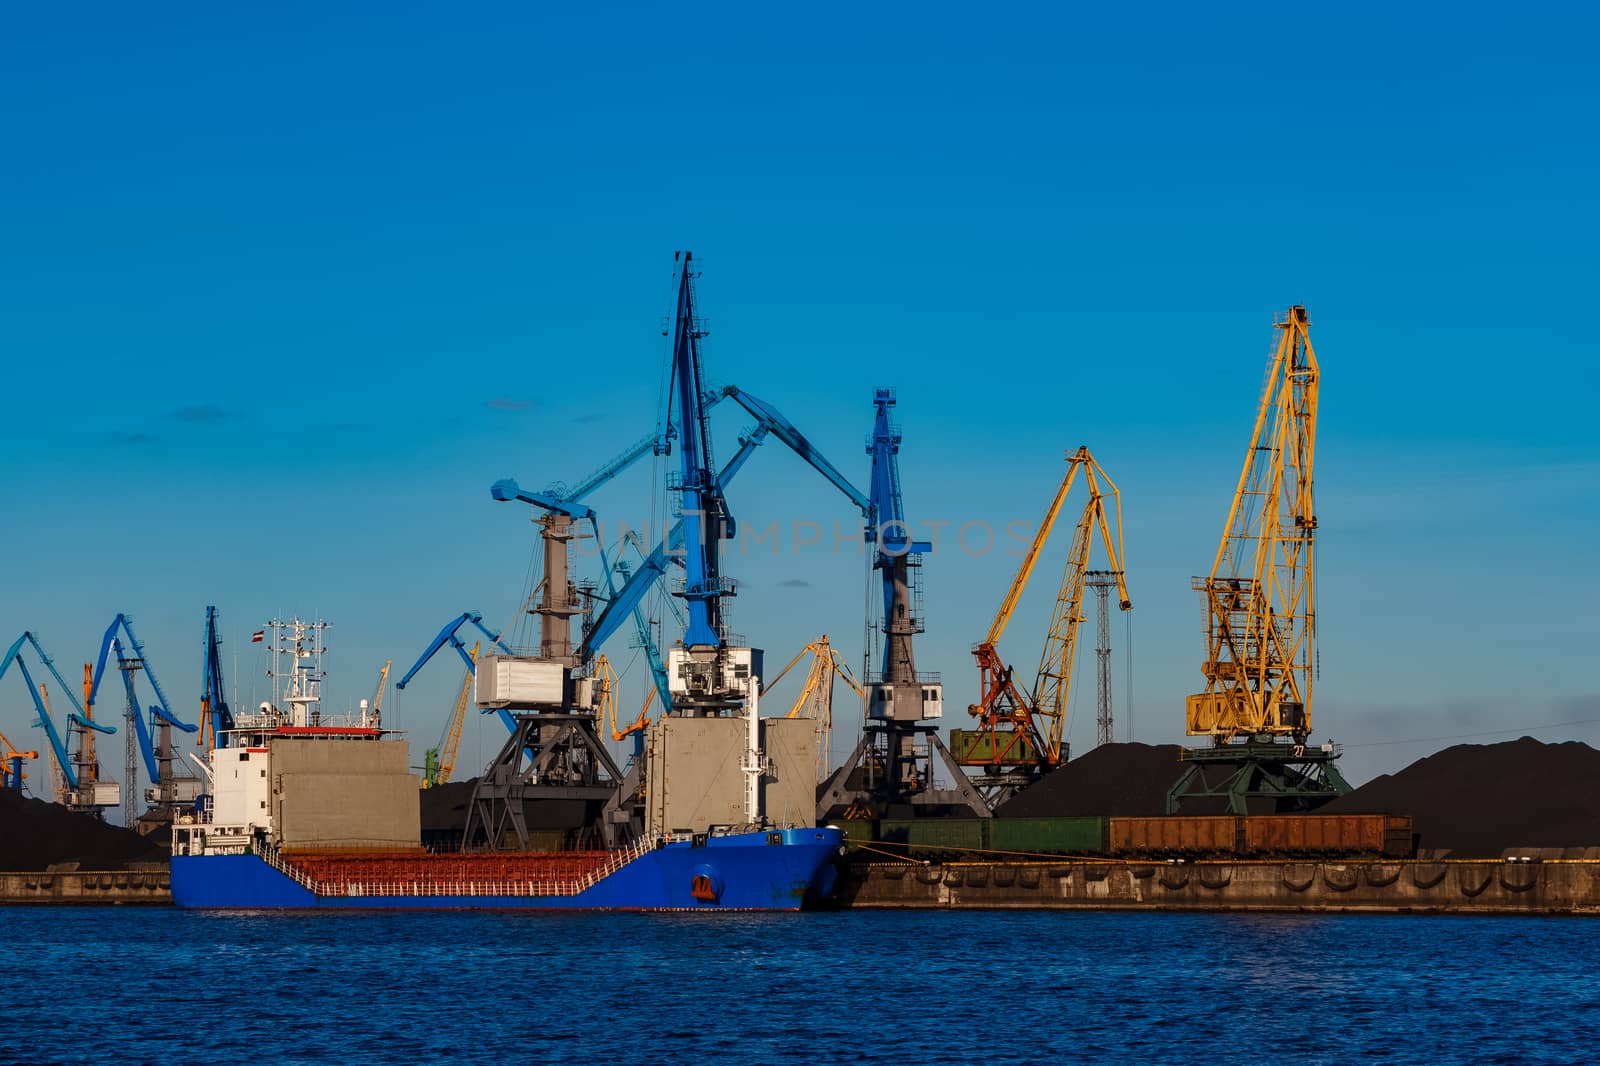 Blue cargo ship loading in the port of Riga, Europe